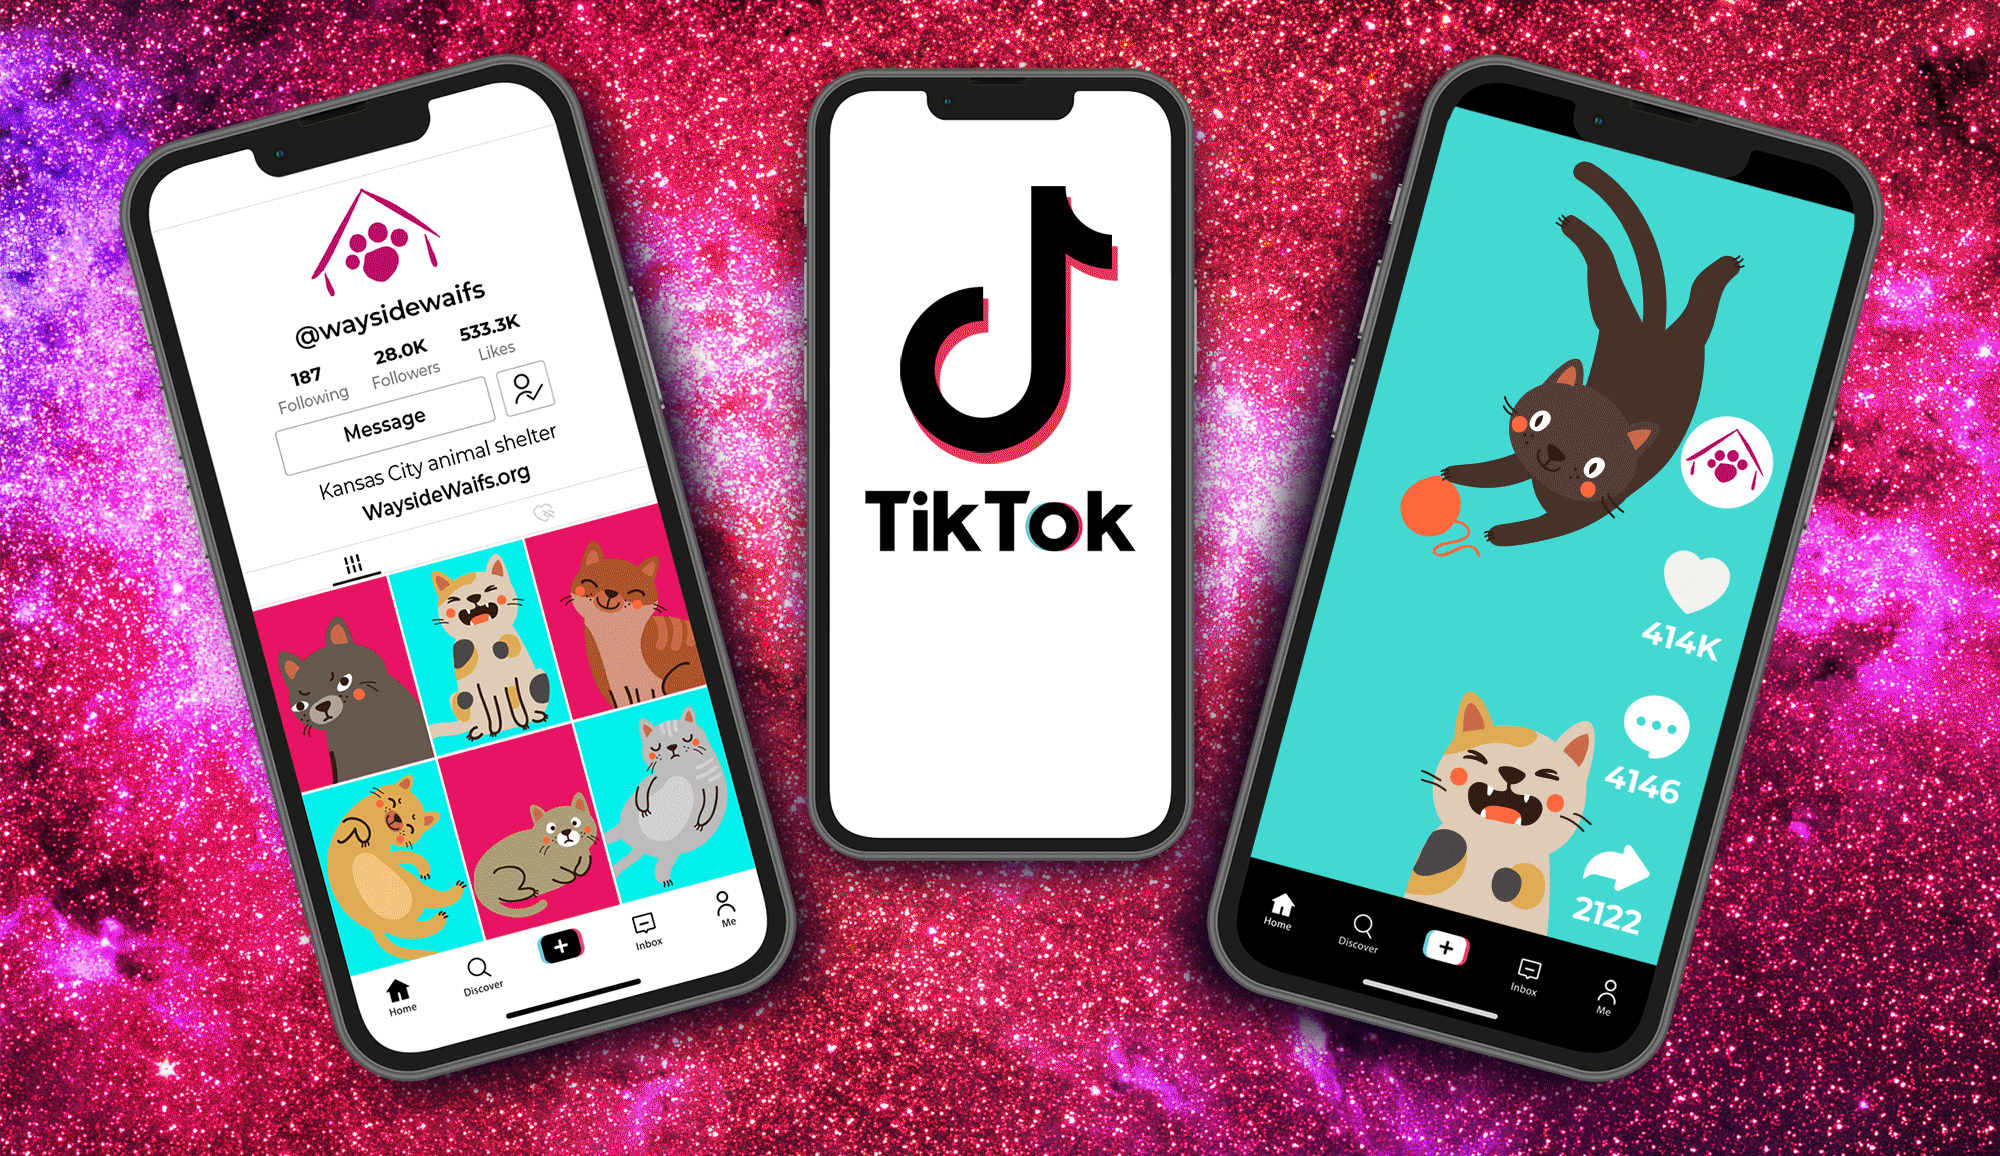 Two phones side by side, left one showing a mockup of an animal shelter TikTok page and right one scrolling pictures of cats.